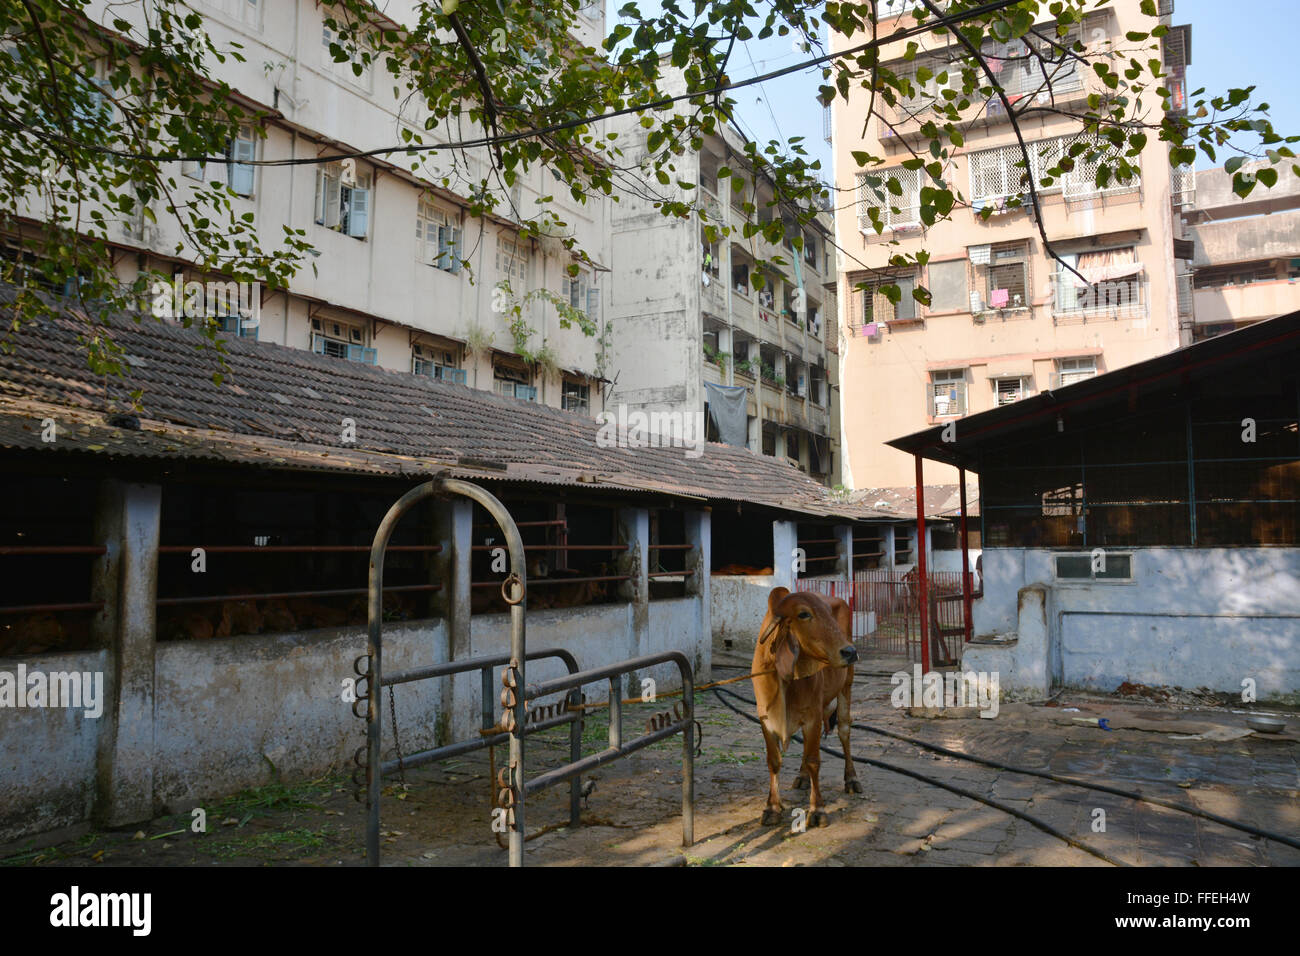 Mumbai, India - October 19, 2015 - Cow in a stable in the center of Mumbai between skyscrapers Stock Photo